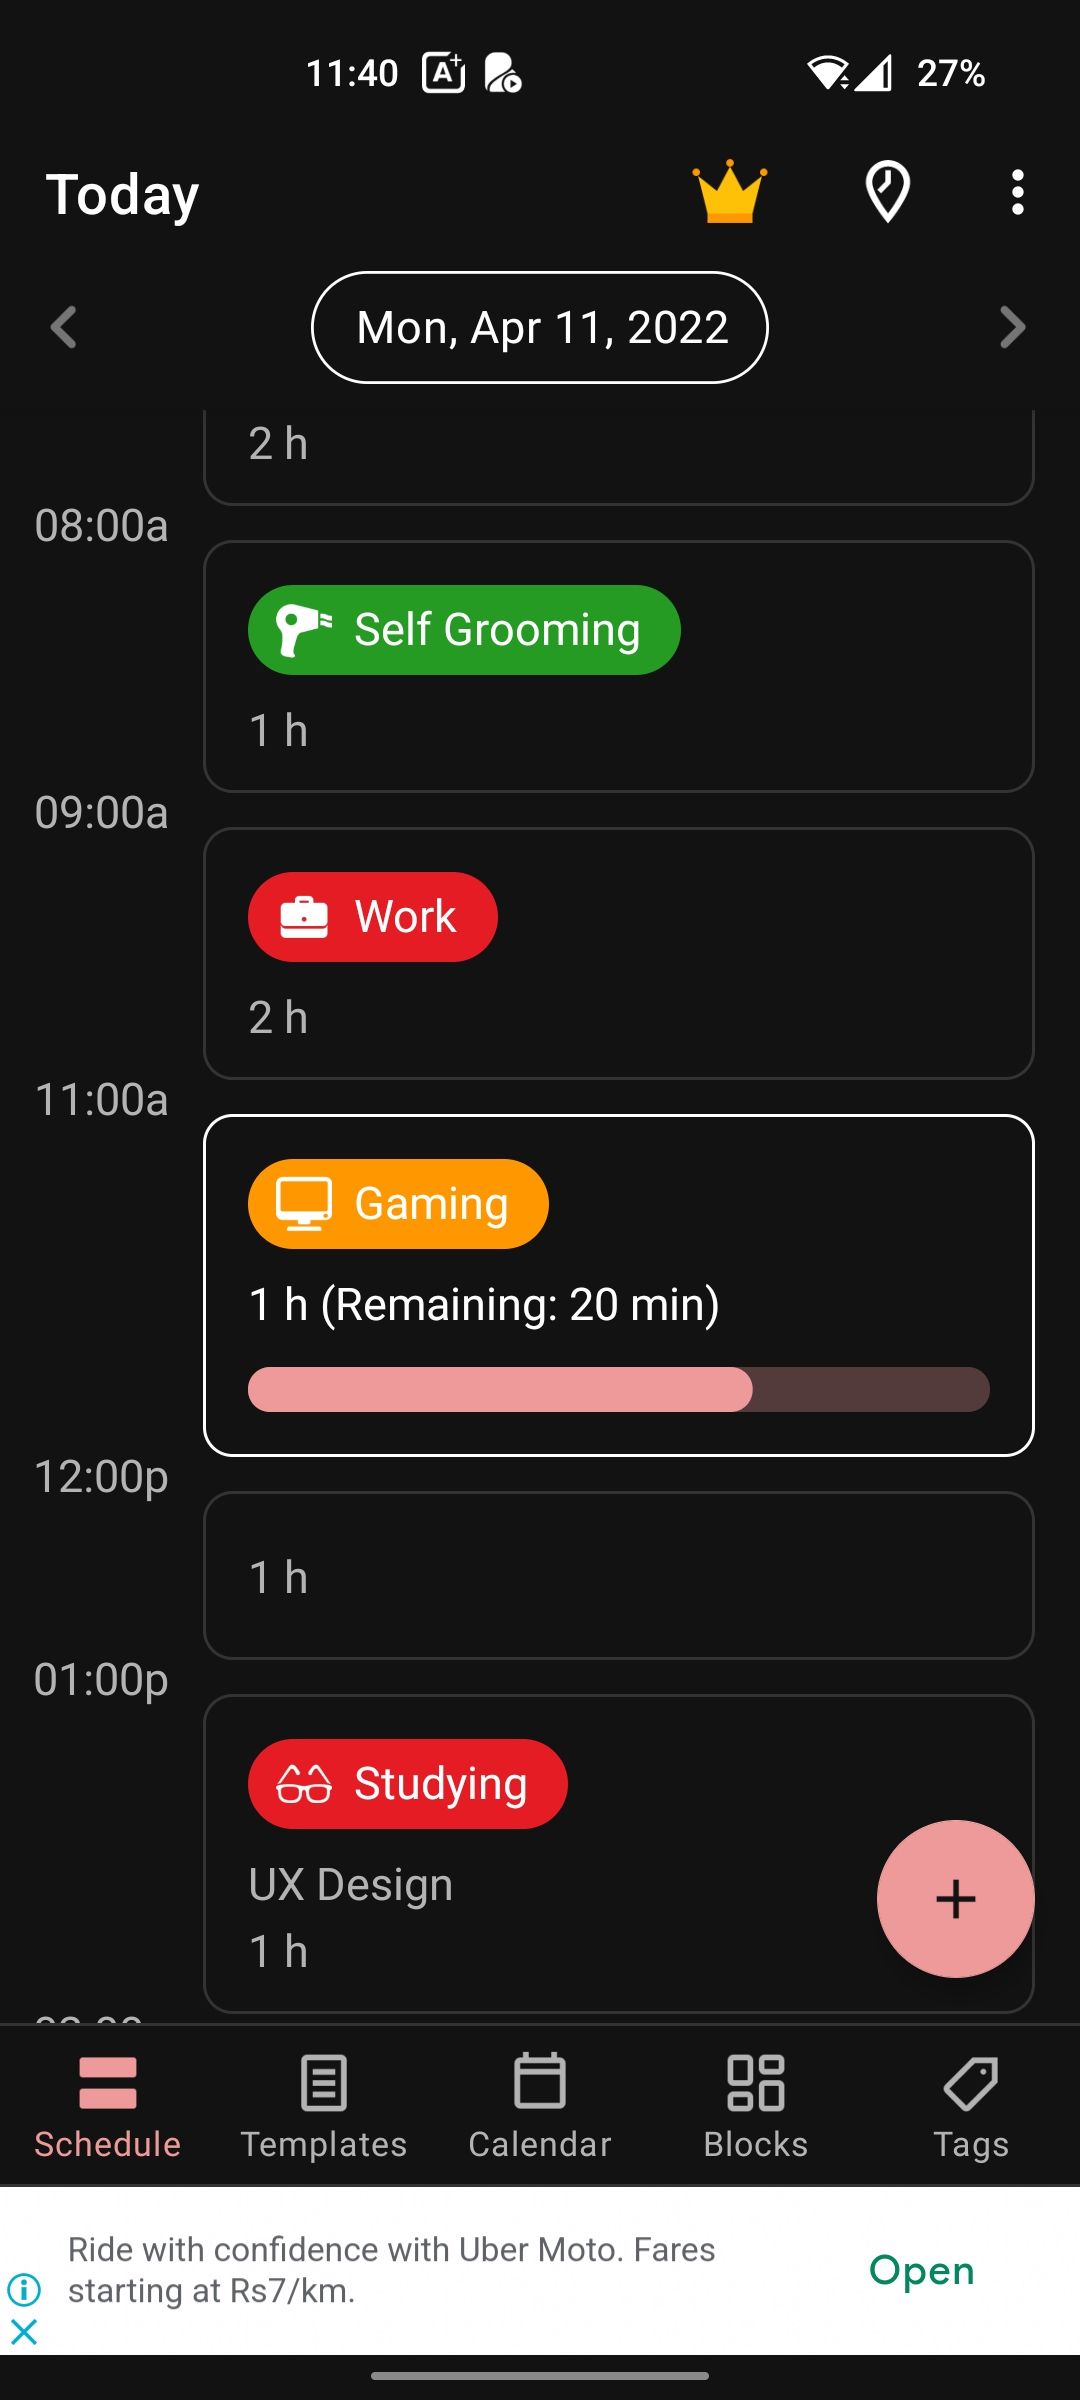 TimeTune schedule with a time block format